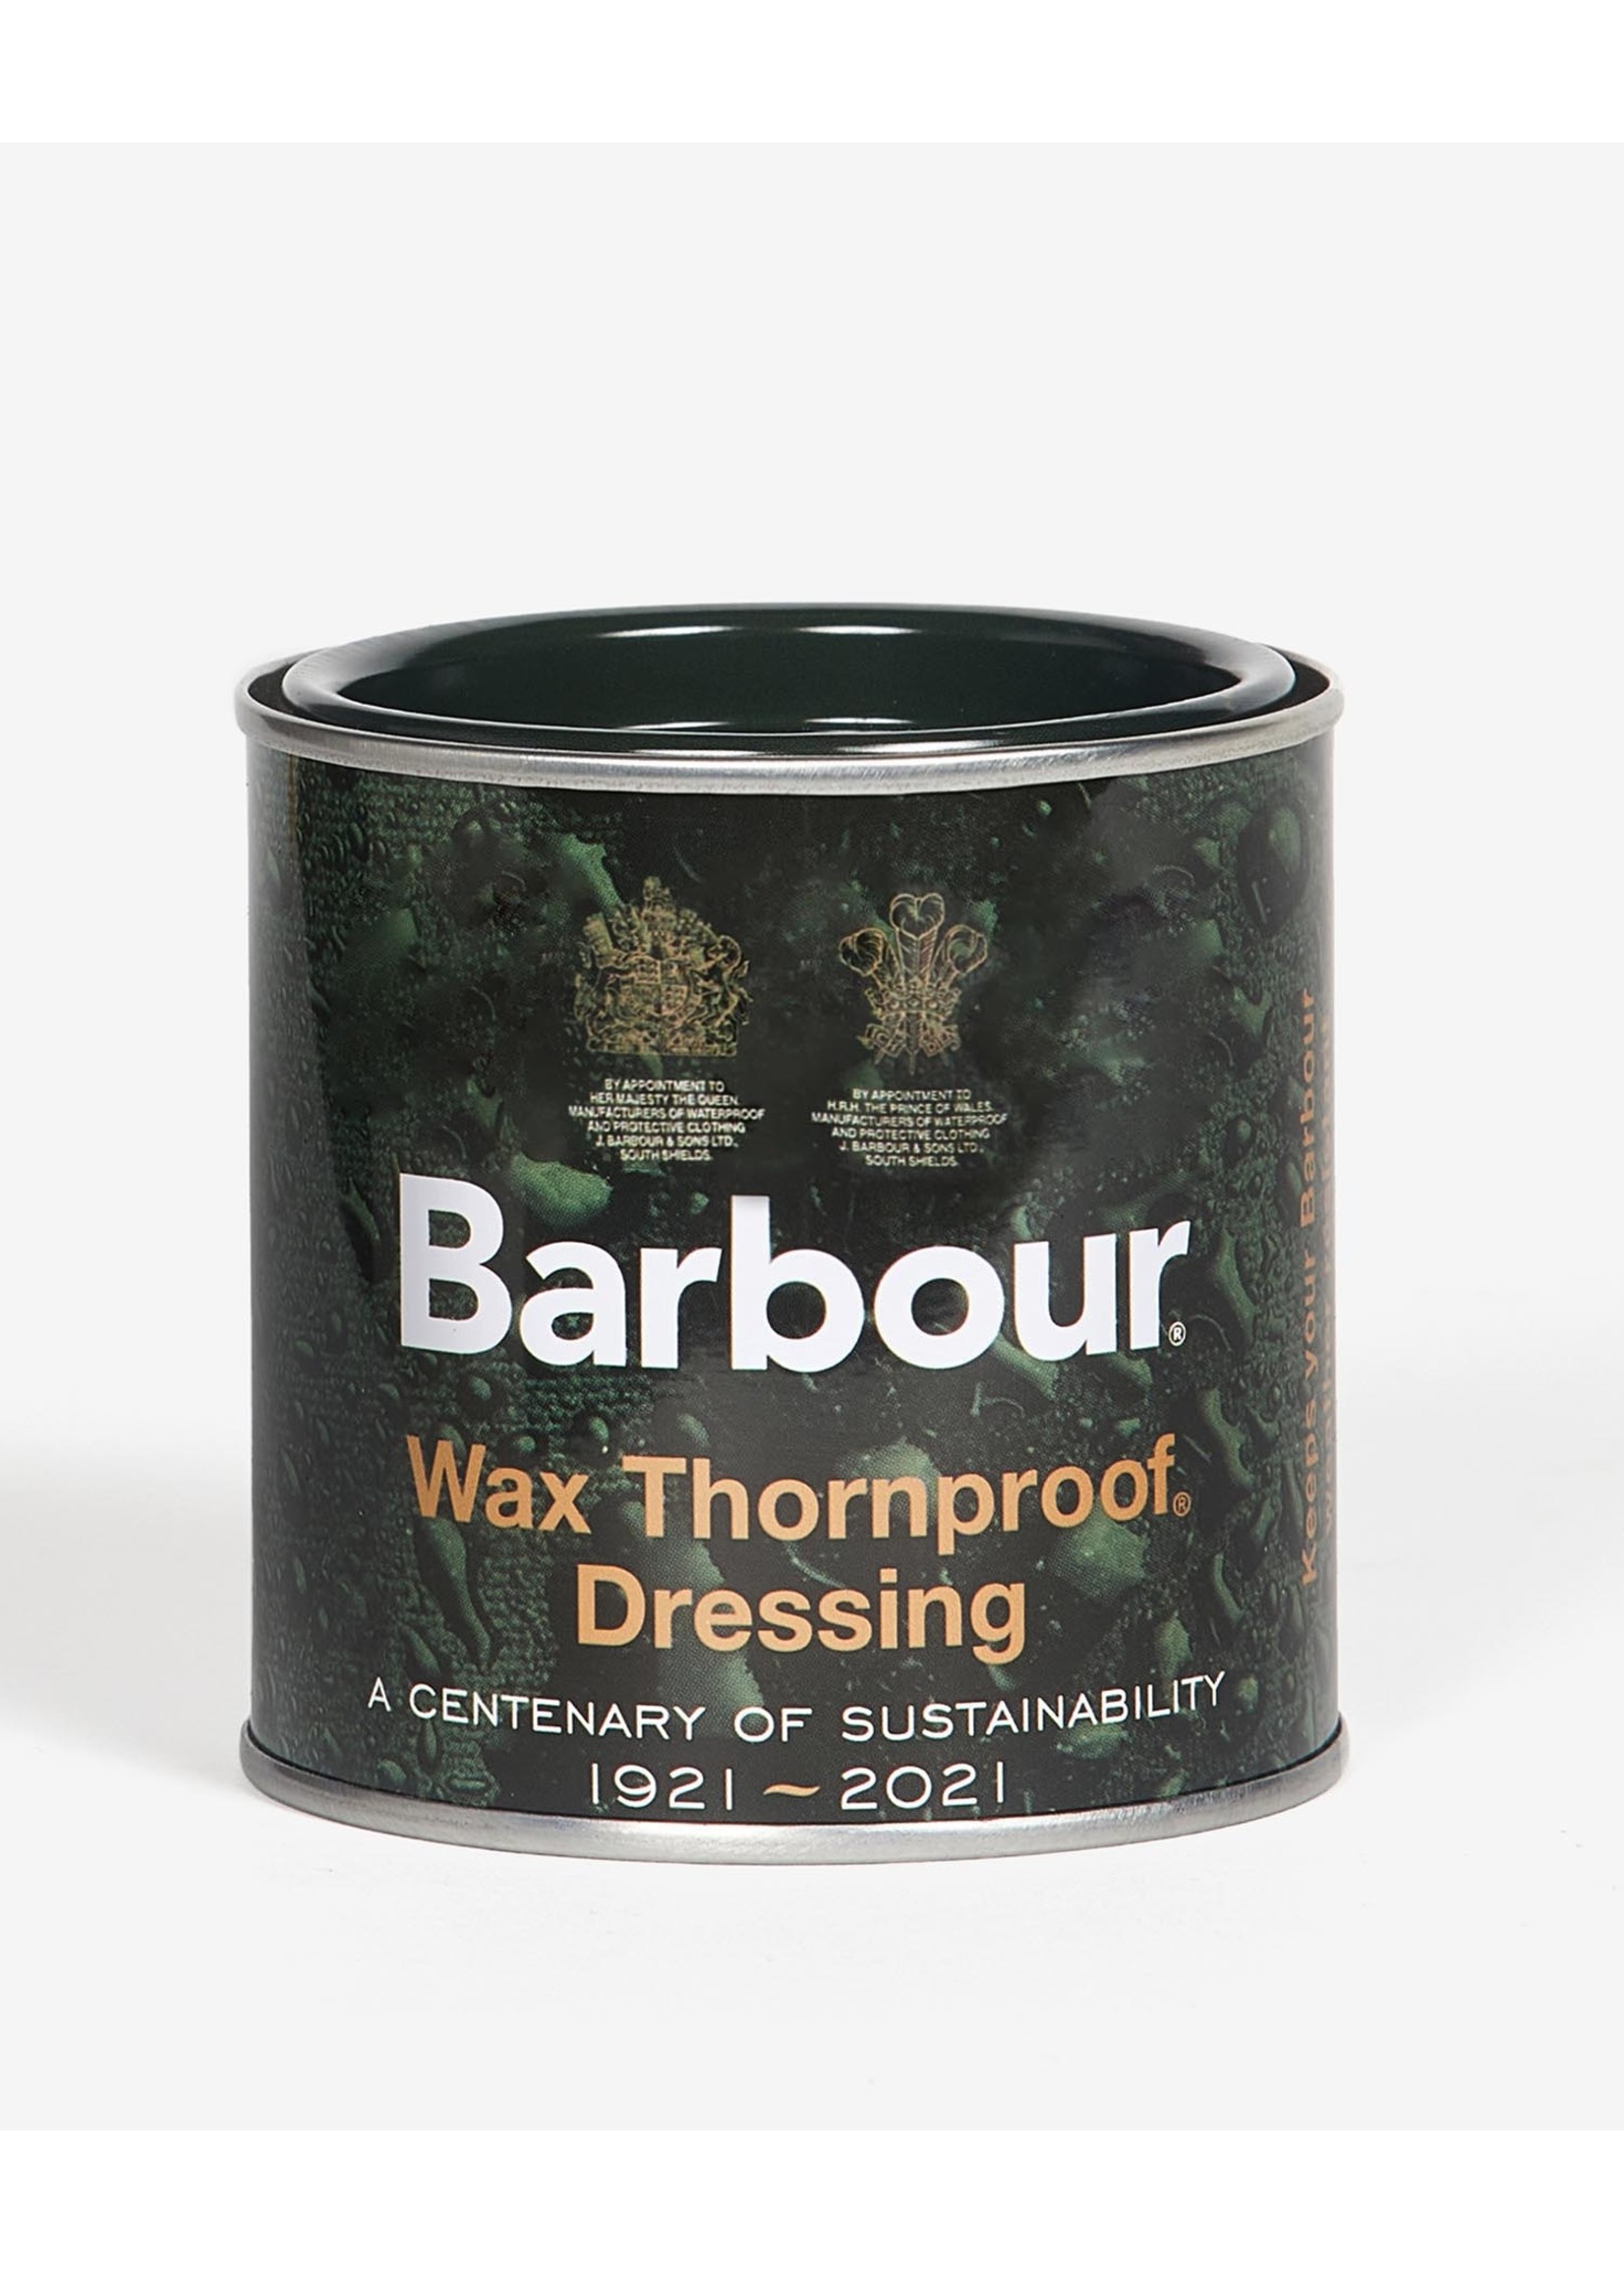 Barbour WAX THORNPROOF DRESSING